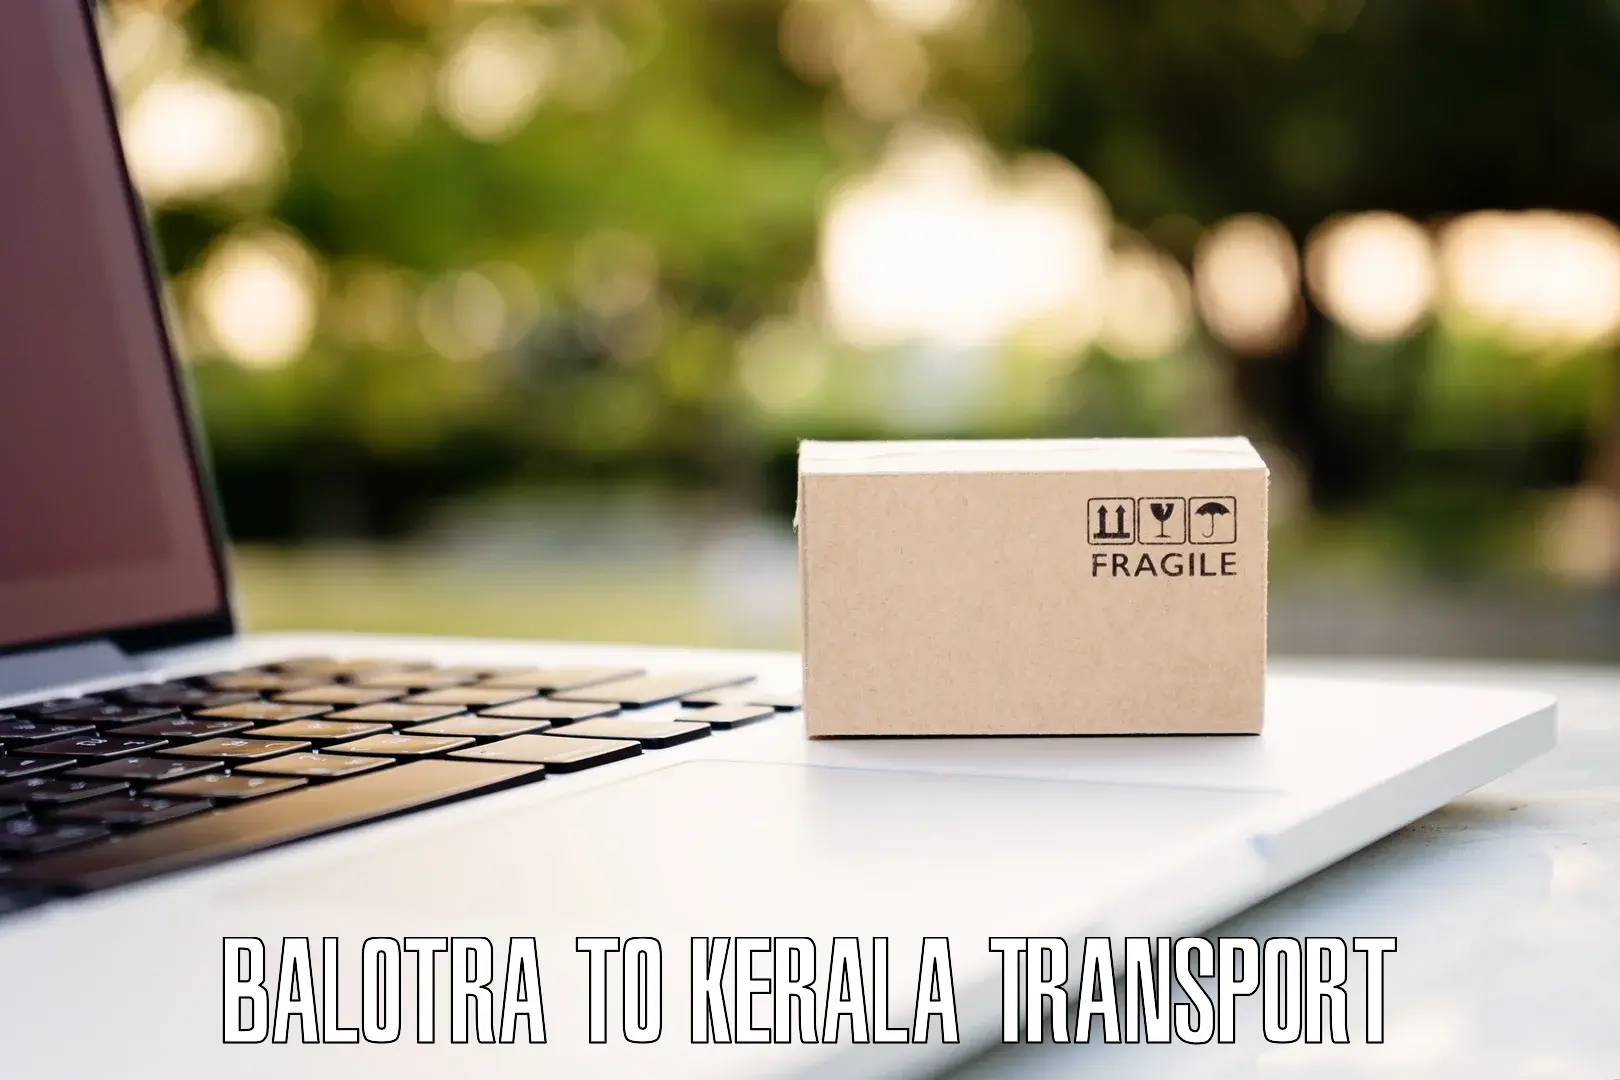 Air freight transport services Balotra to Cochin University of Science and Technology